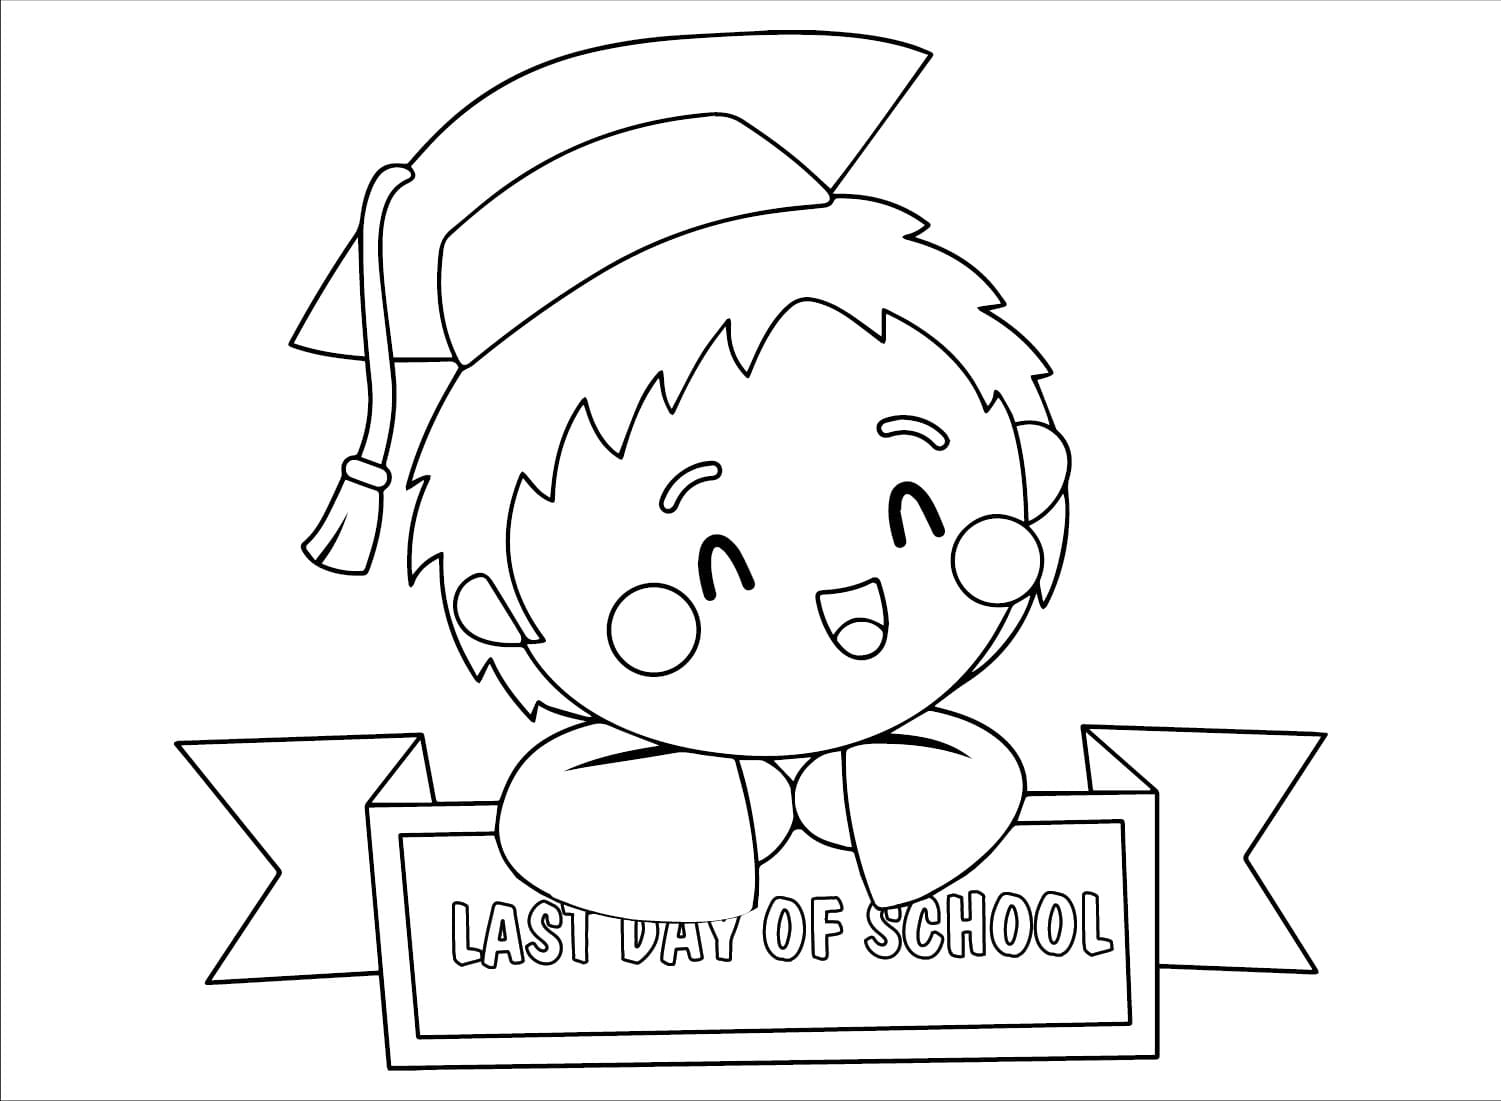 last-day-of-school-activities-coloring-page-download-print-or-color